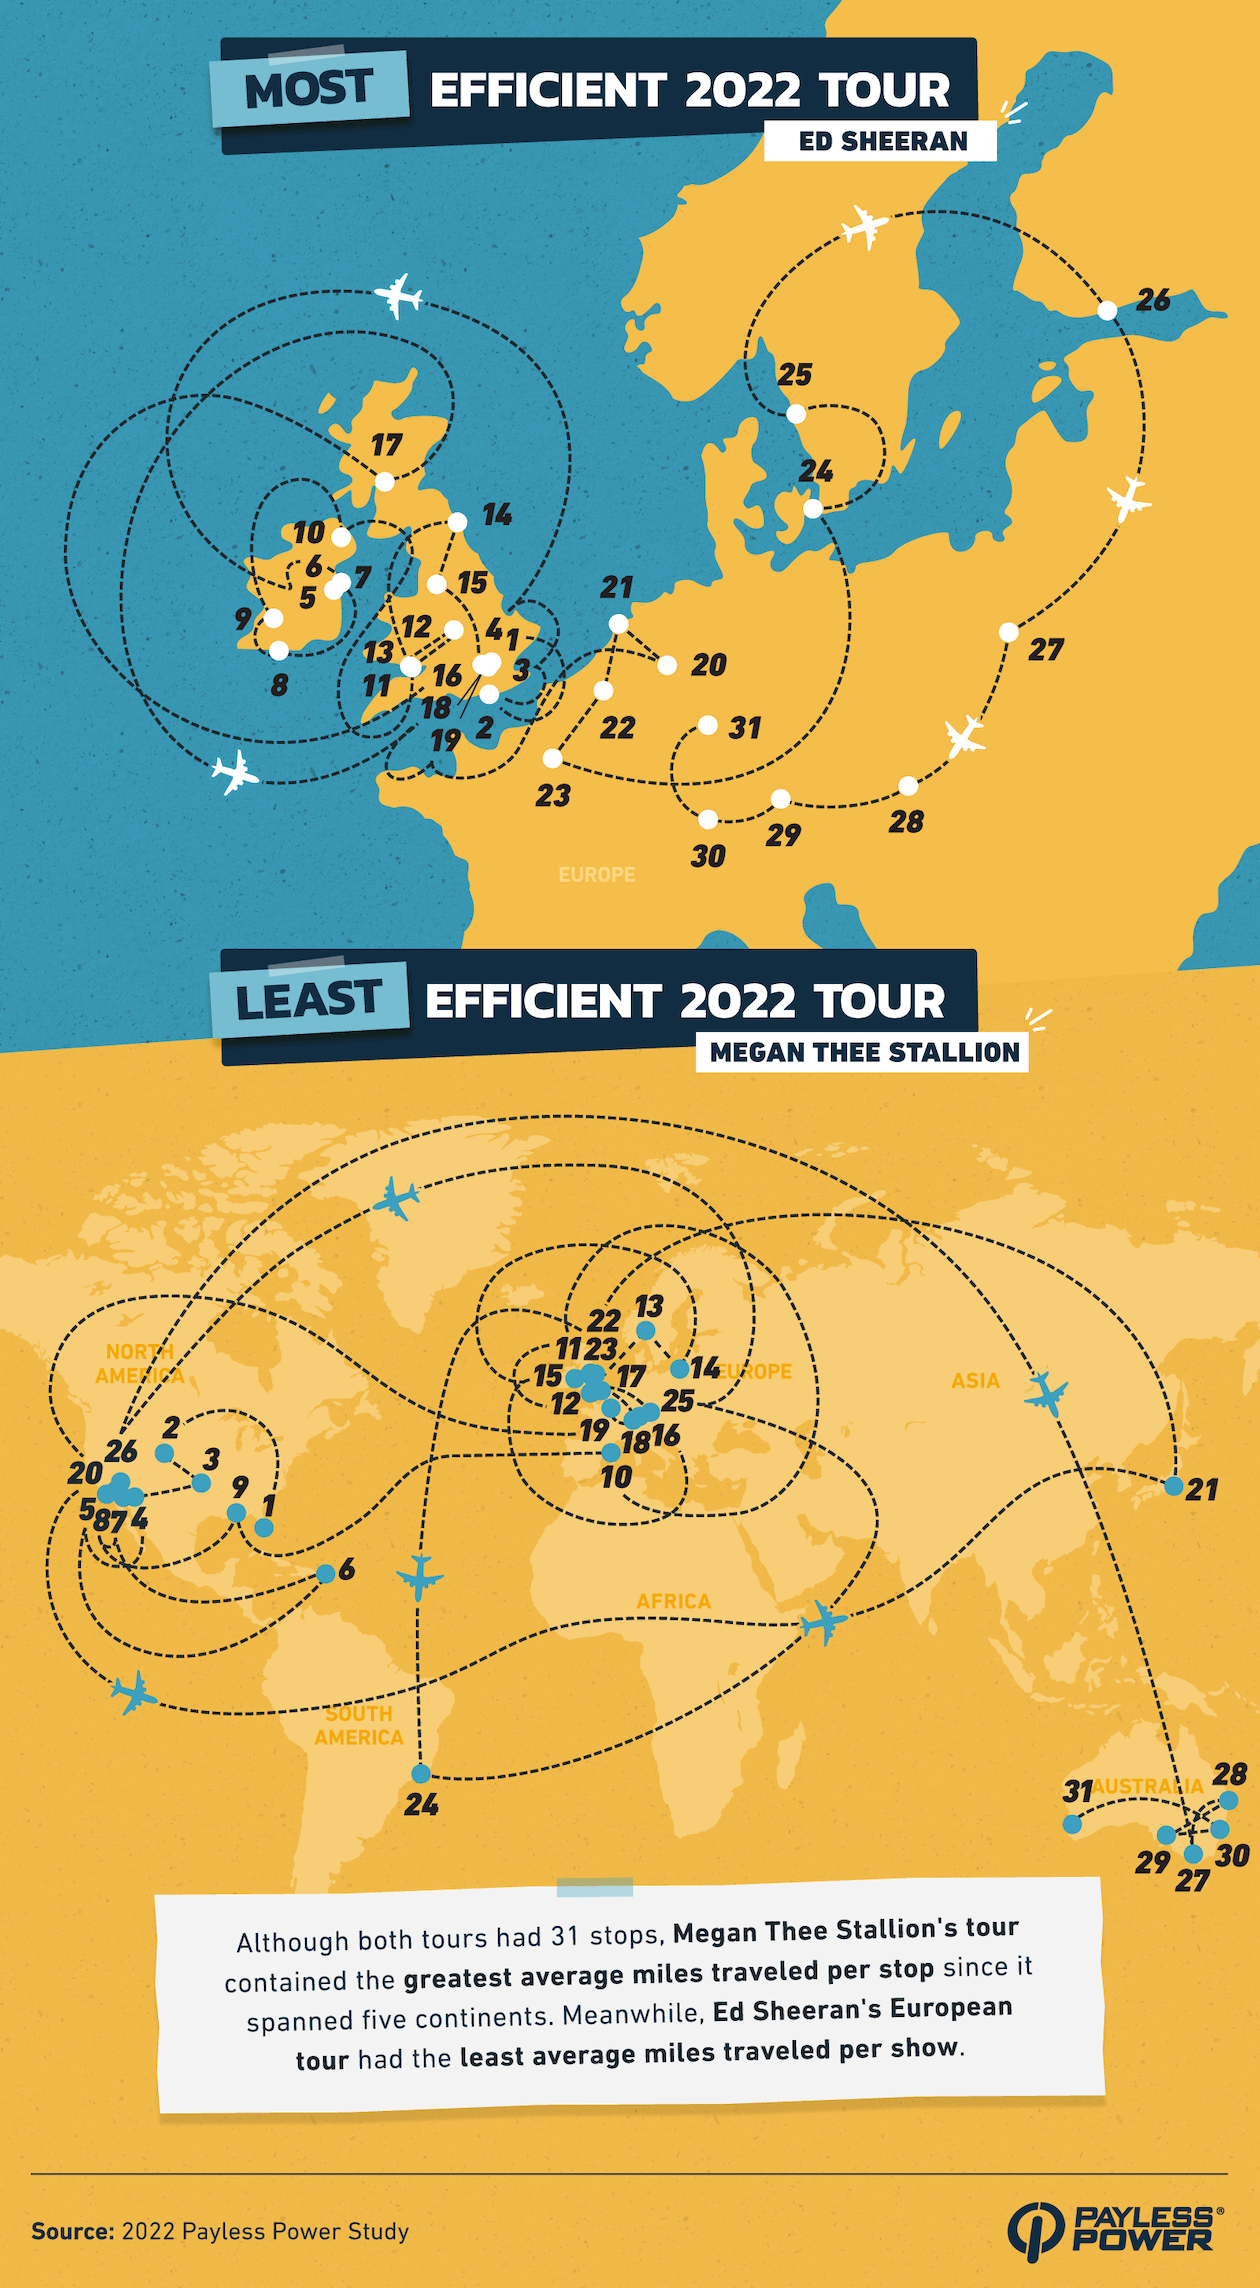 Most and least efficient 2022 tour infographic